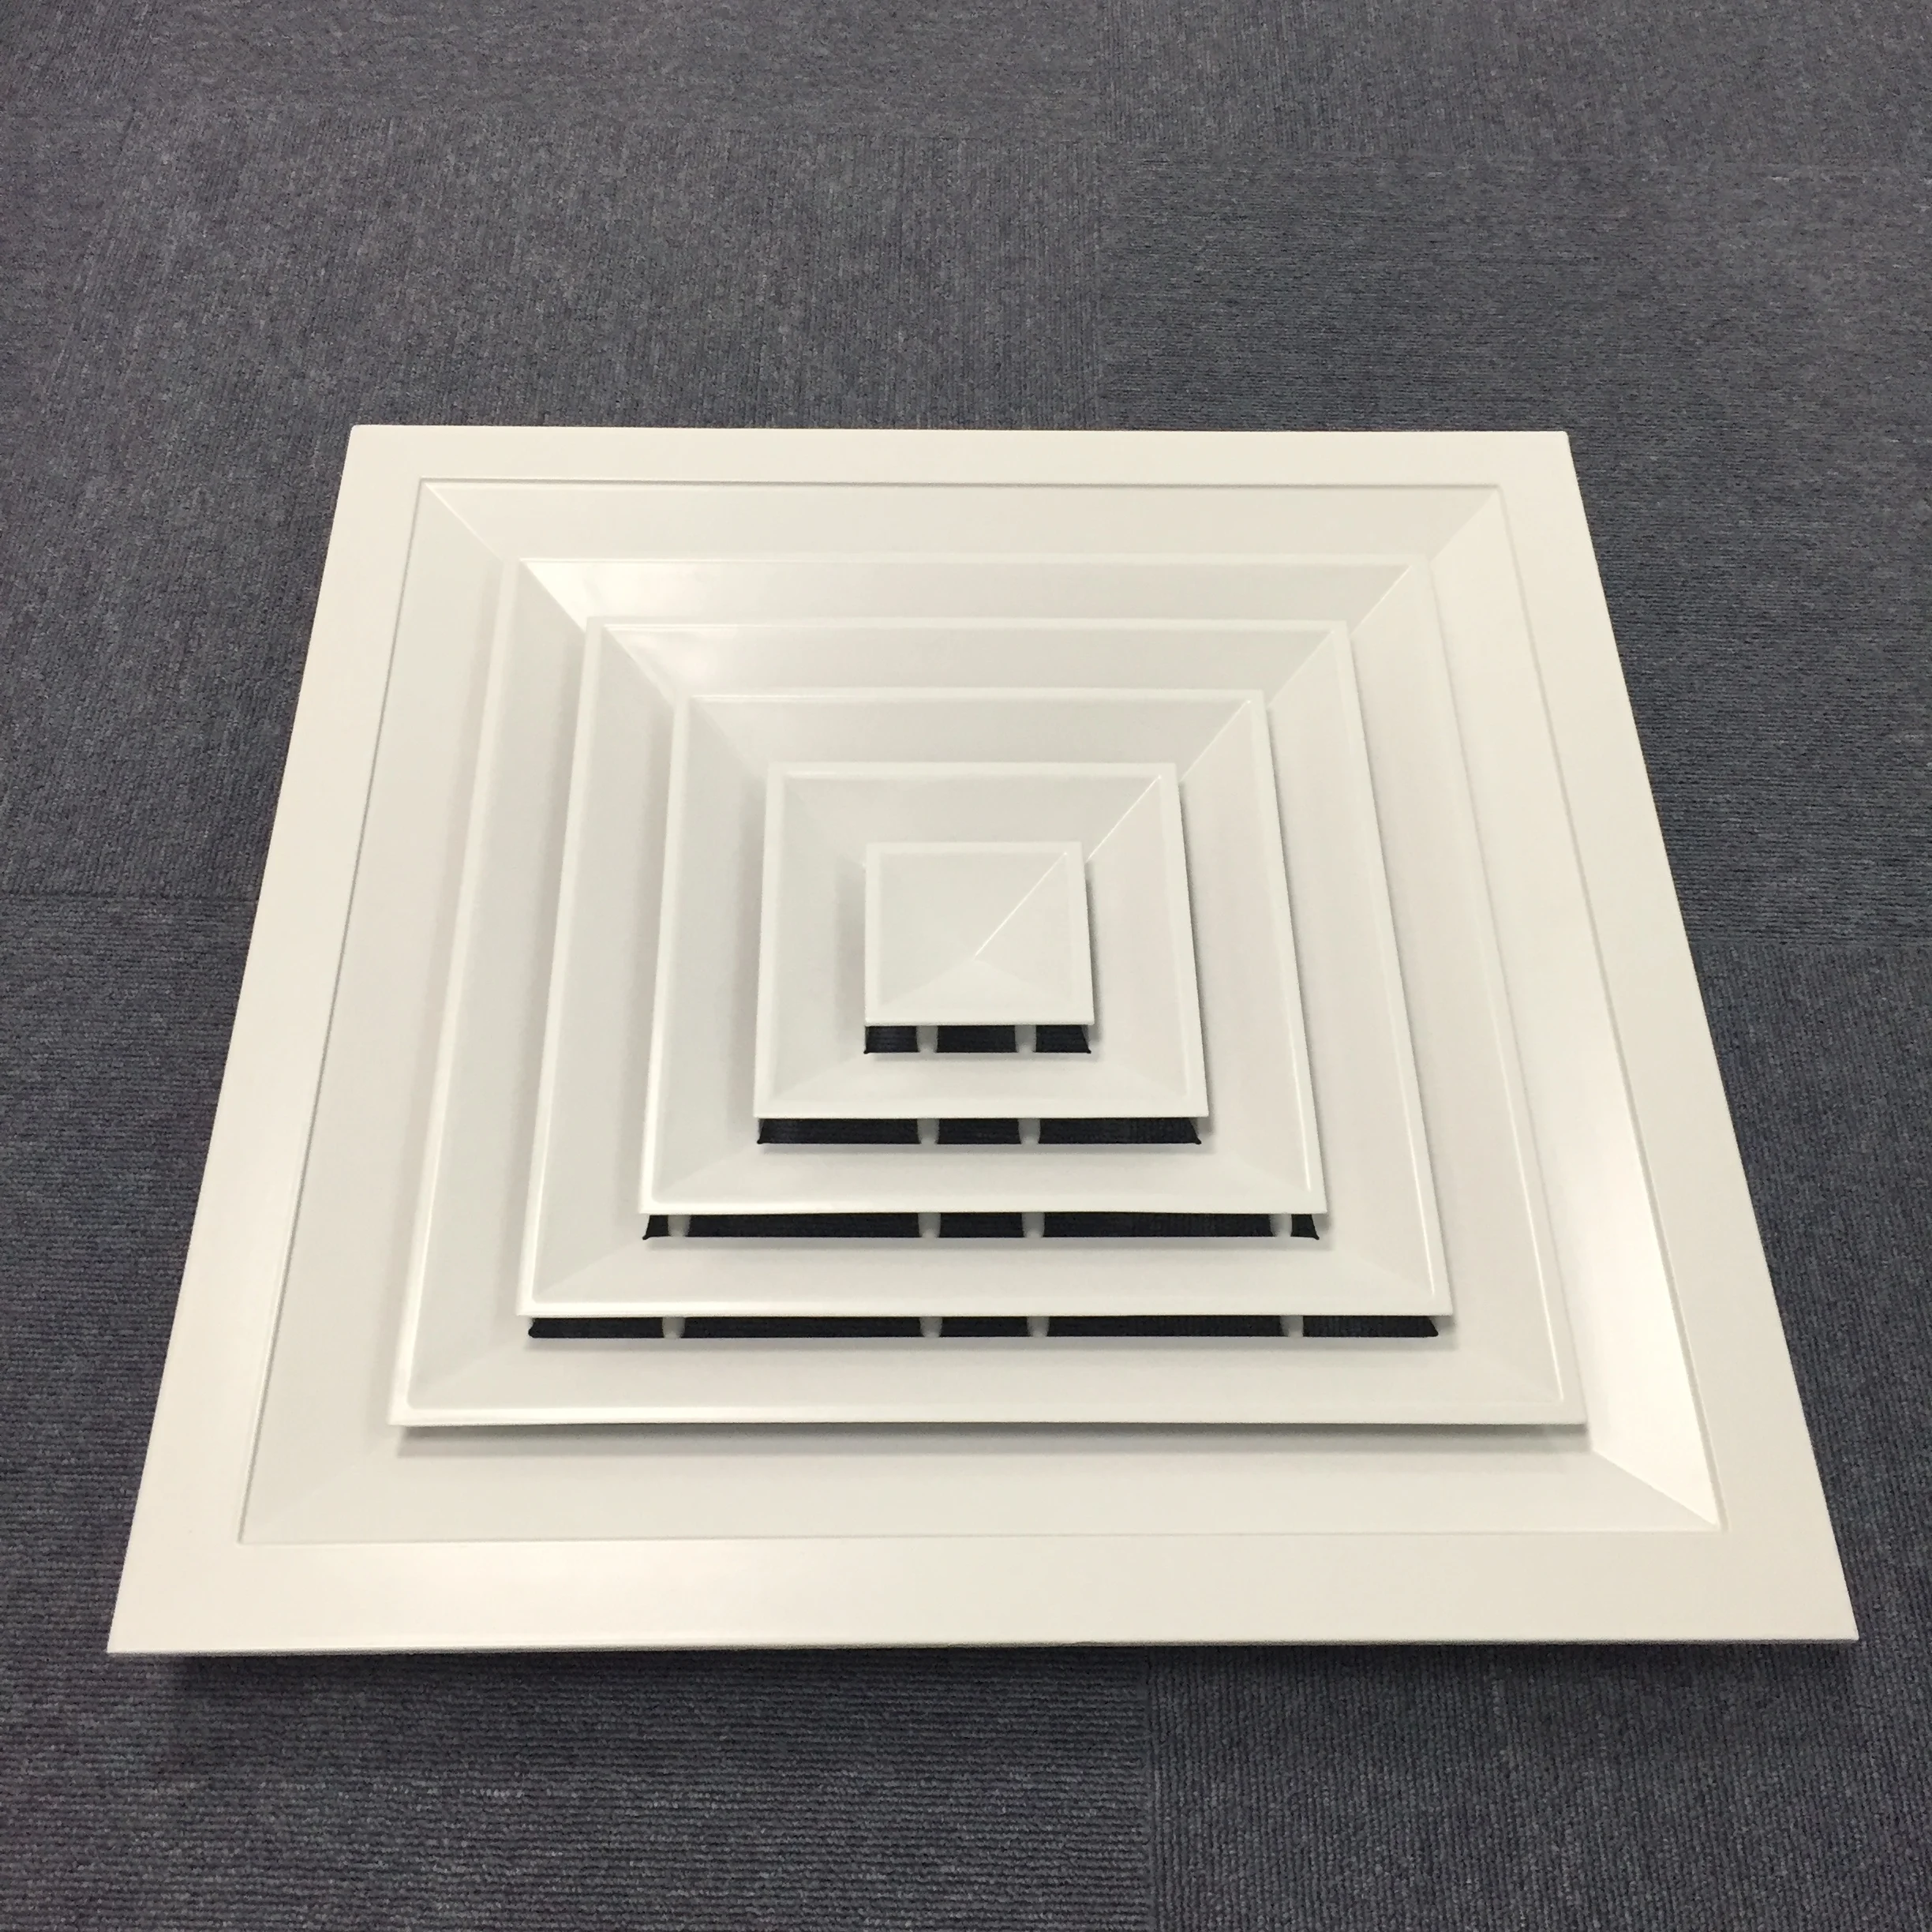 Air conditioning grille supply air diffuser square ceiling air diffuser